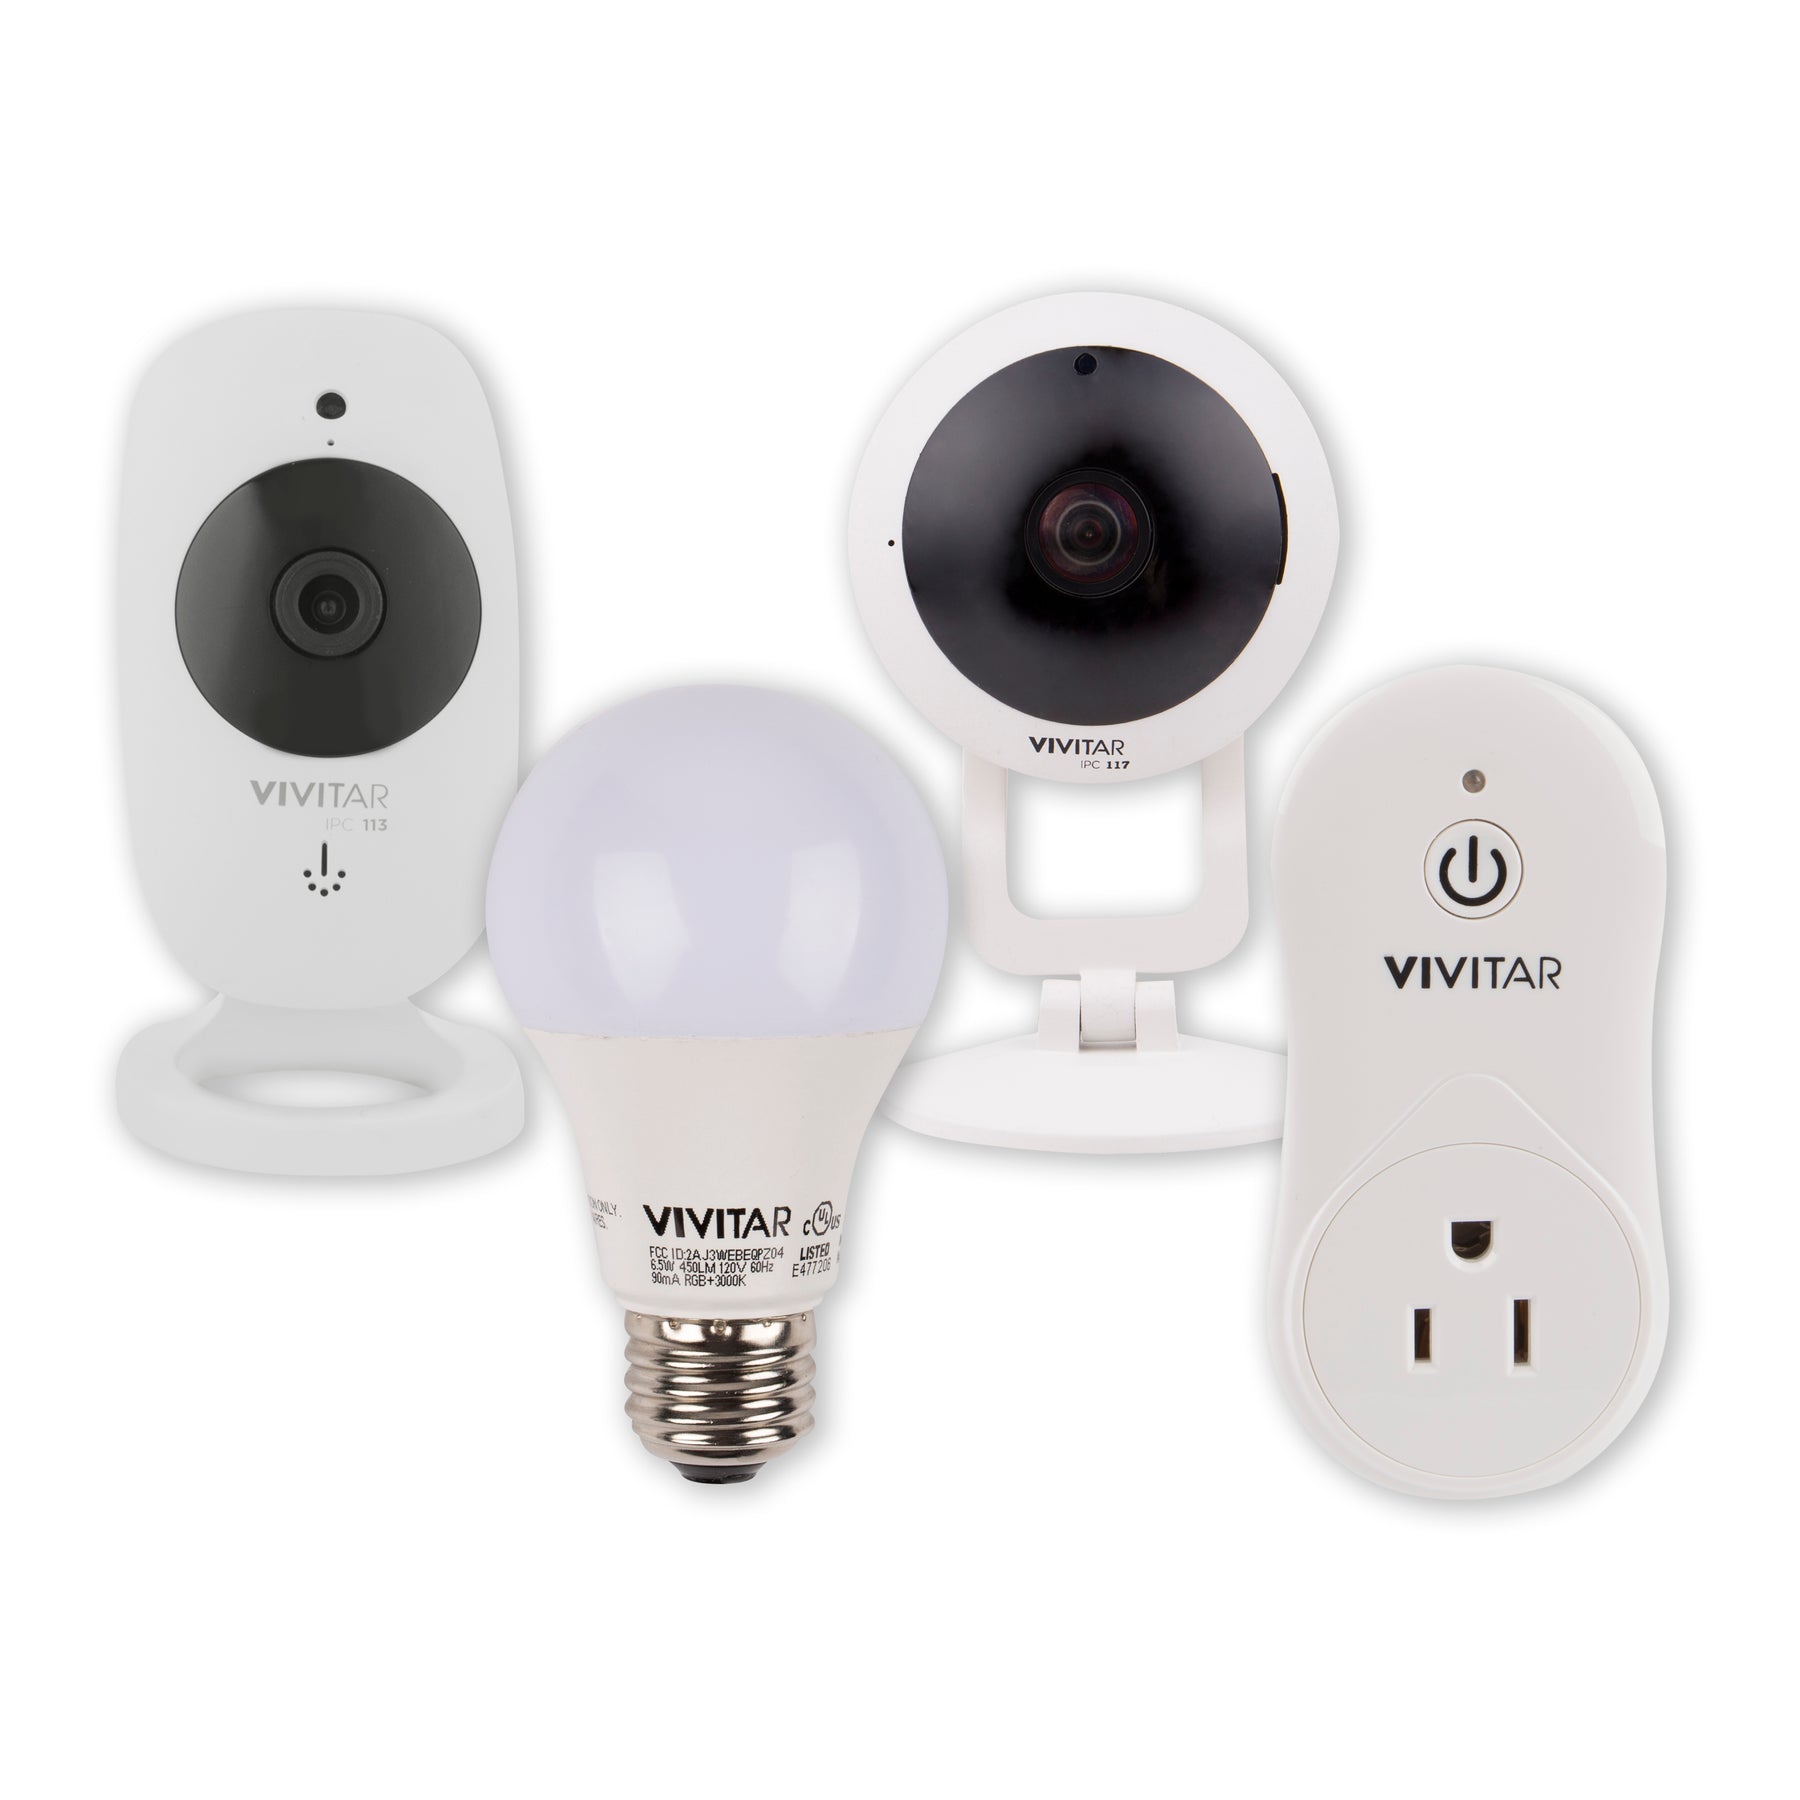 Vivitar Unveils Brand New Smart Home Line at 2018 CES®, Keeping Homes Safe With New Wi-Fi Connected Devices